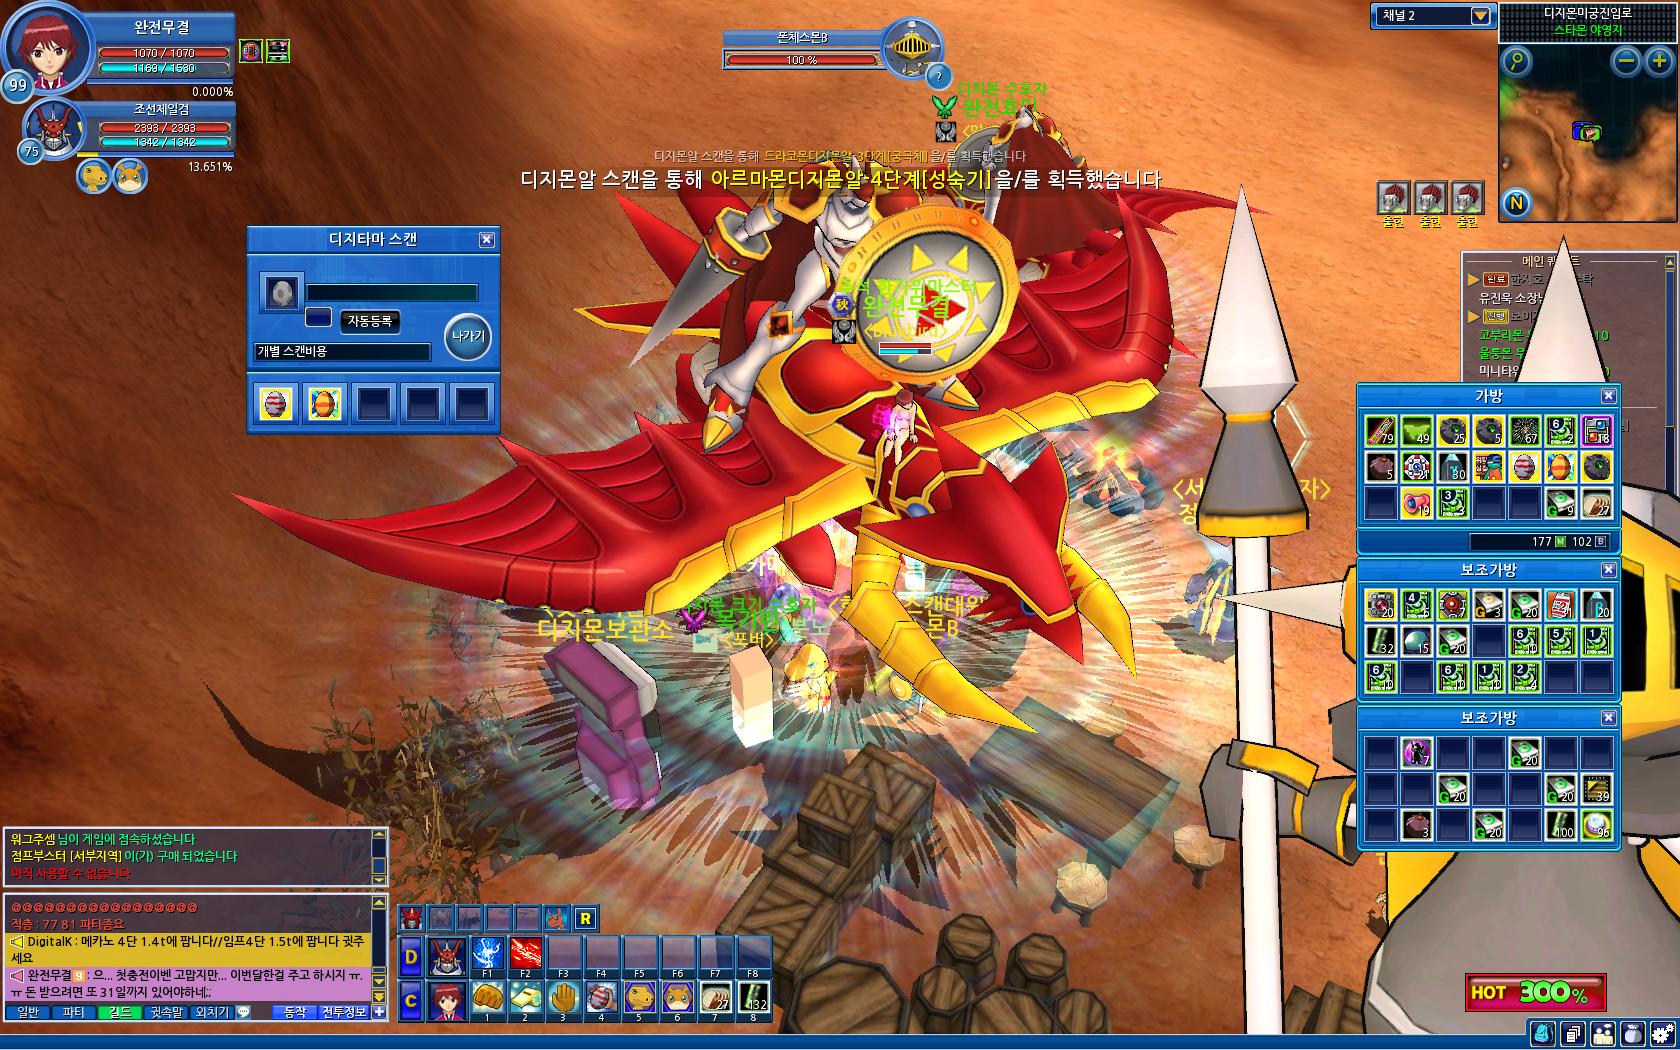 Digimon Masters Online Tera for Sale